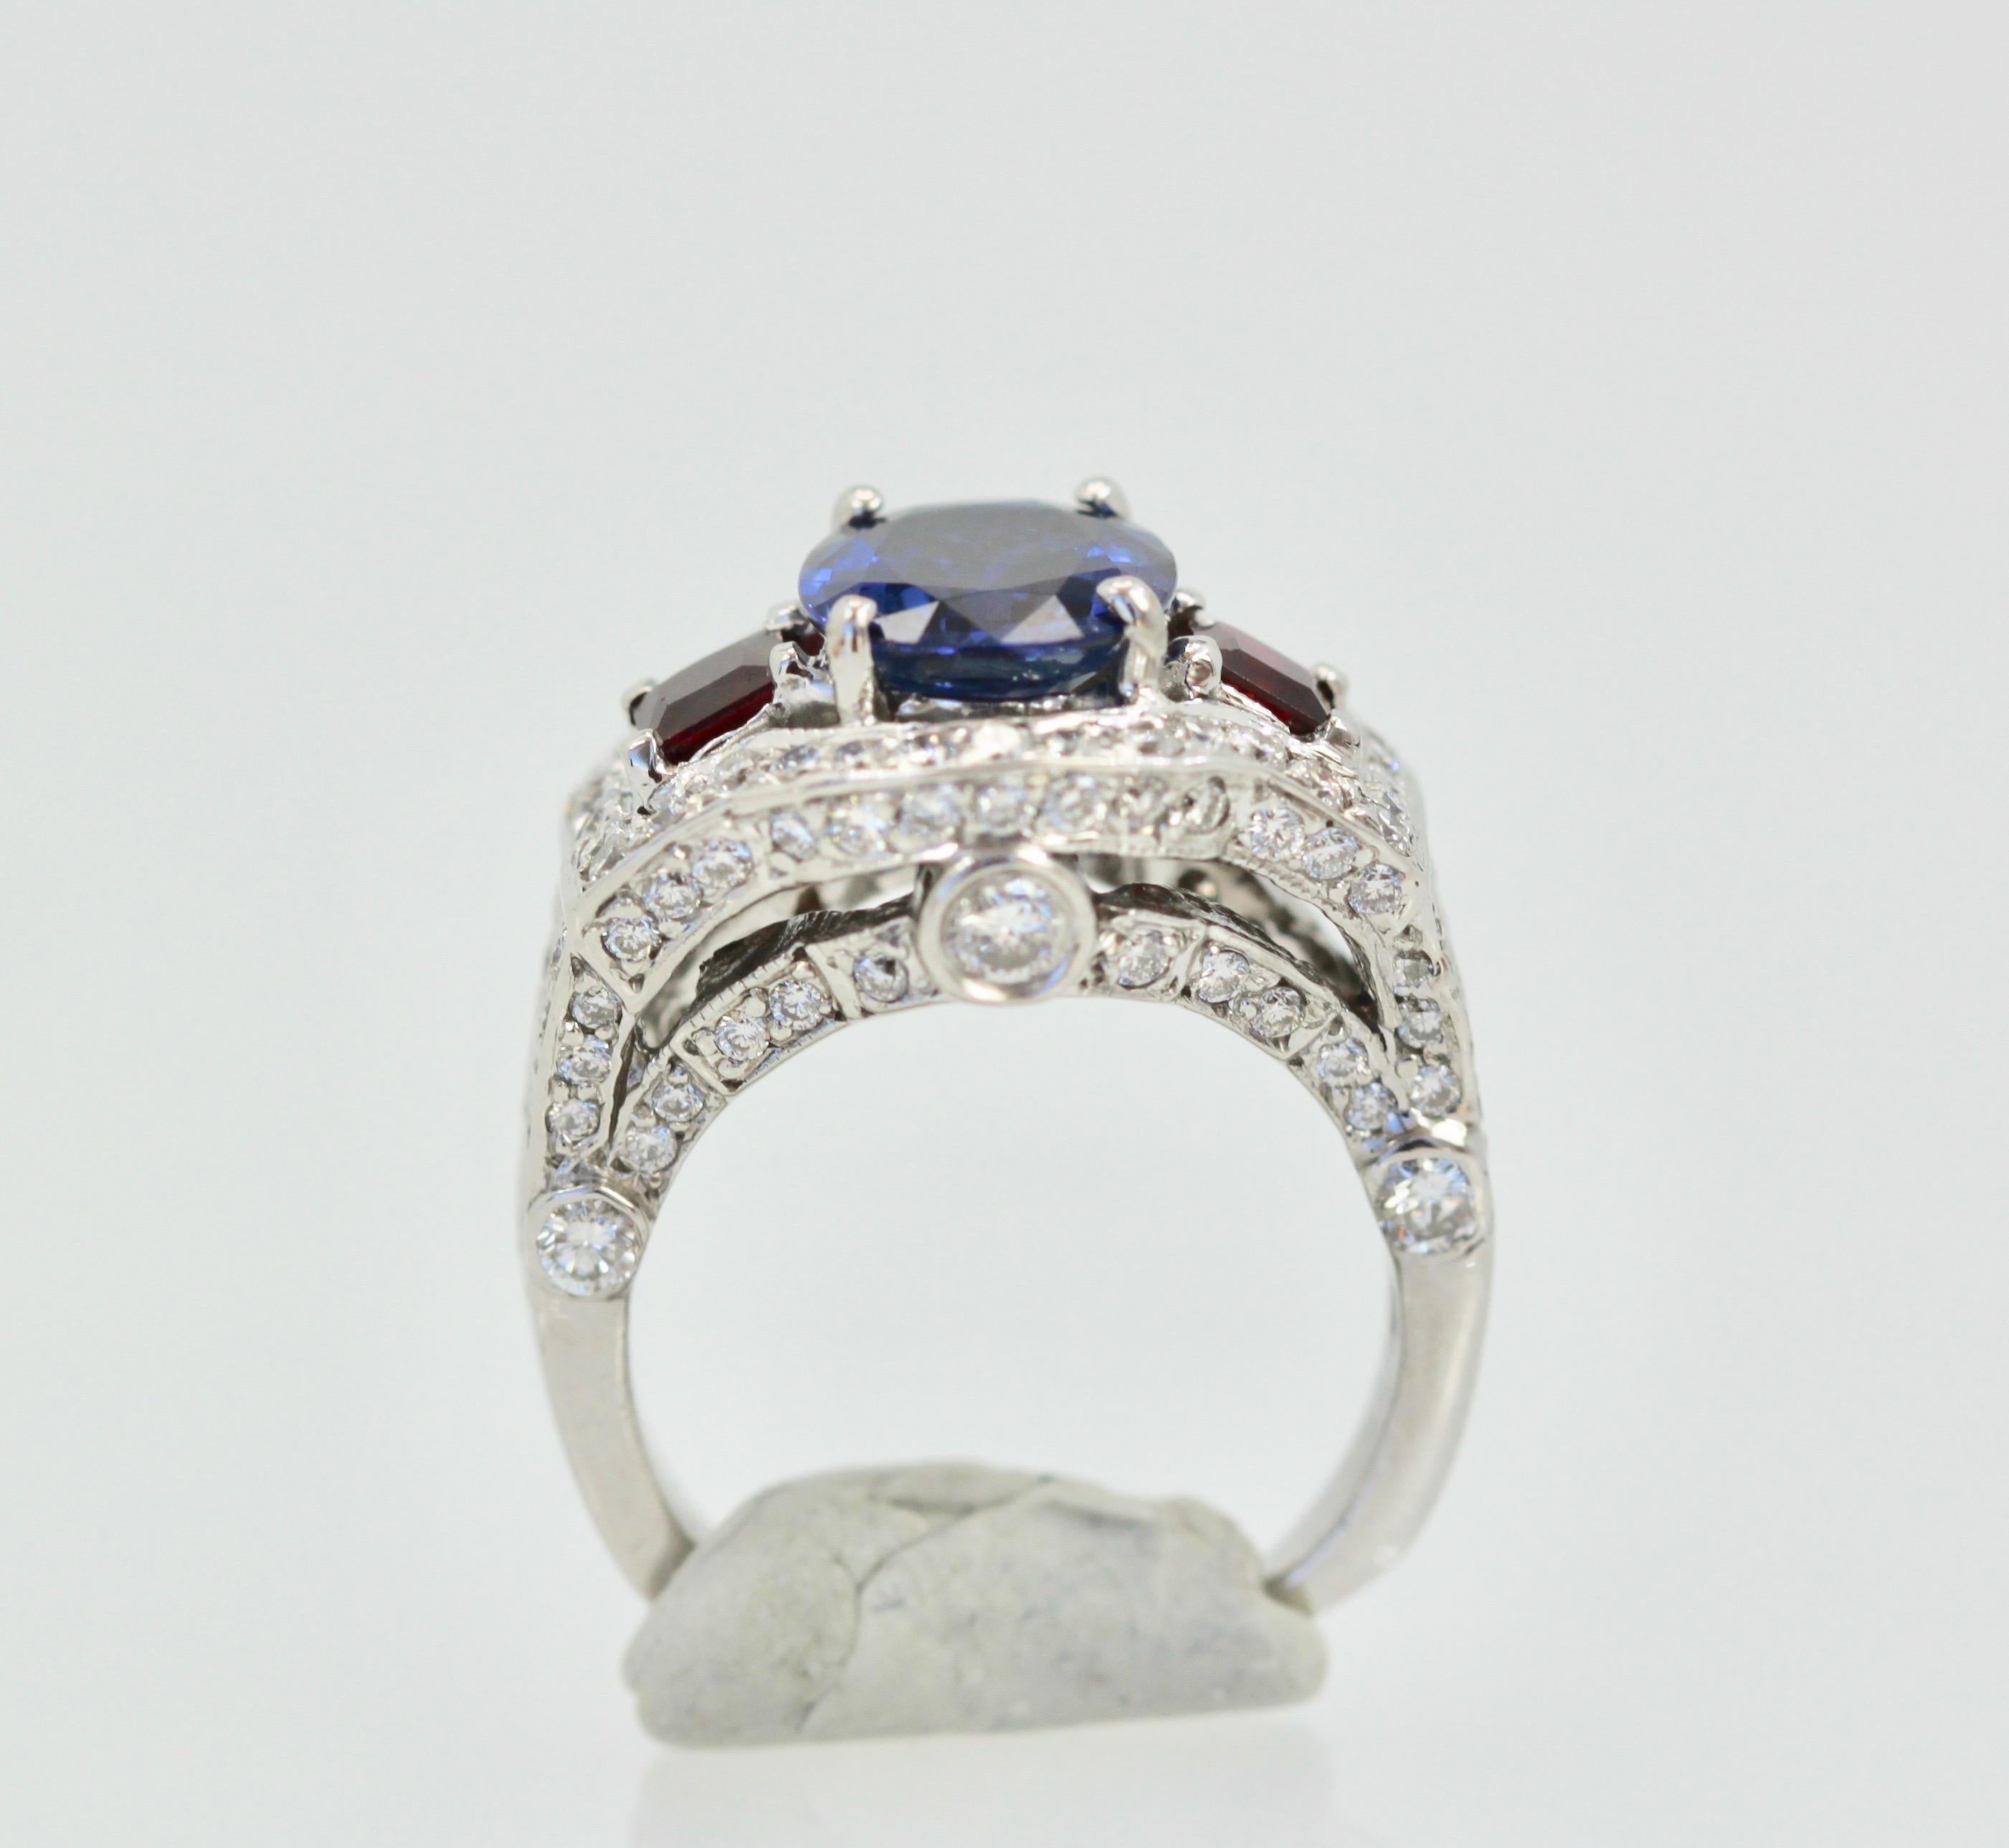 This lovely Sapphire Ruby Diamond Ring is set in 14K White Gold.  It features a Oval cut Sapphire weighing in at 2.67 Carats, flanked by 2 Rubys square cut and weighing 0.70 carats and White Diamonds, F-G, VS weighting in at 2.50 Carats.  Set in a